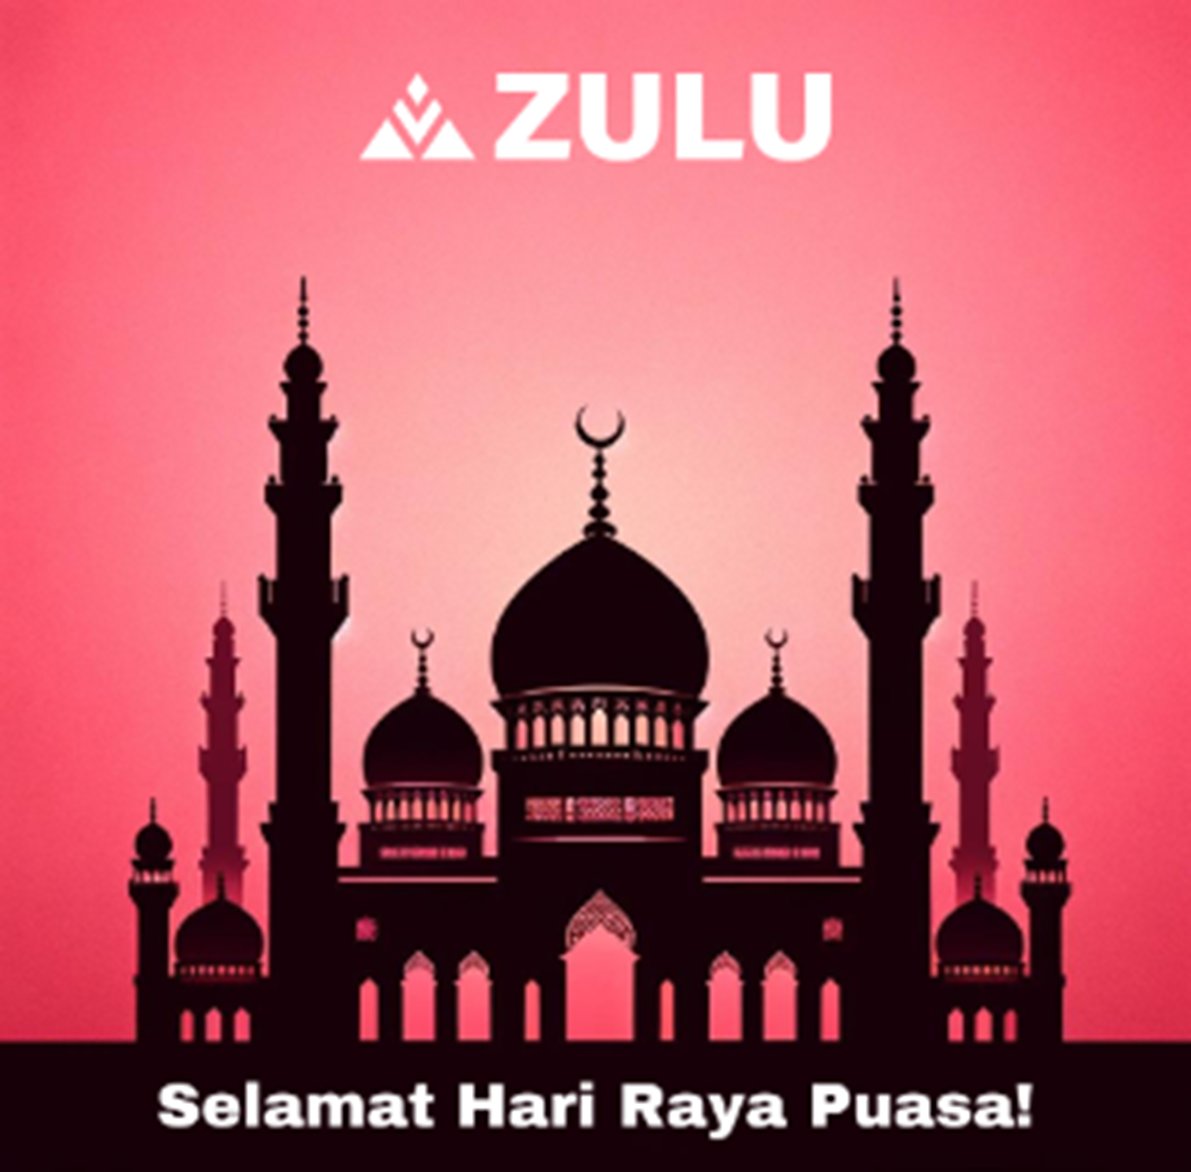 We wish all those celebrating a joyous and prosperous #HariRaya holiday from the Zulu team! 🌙⏫